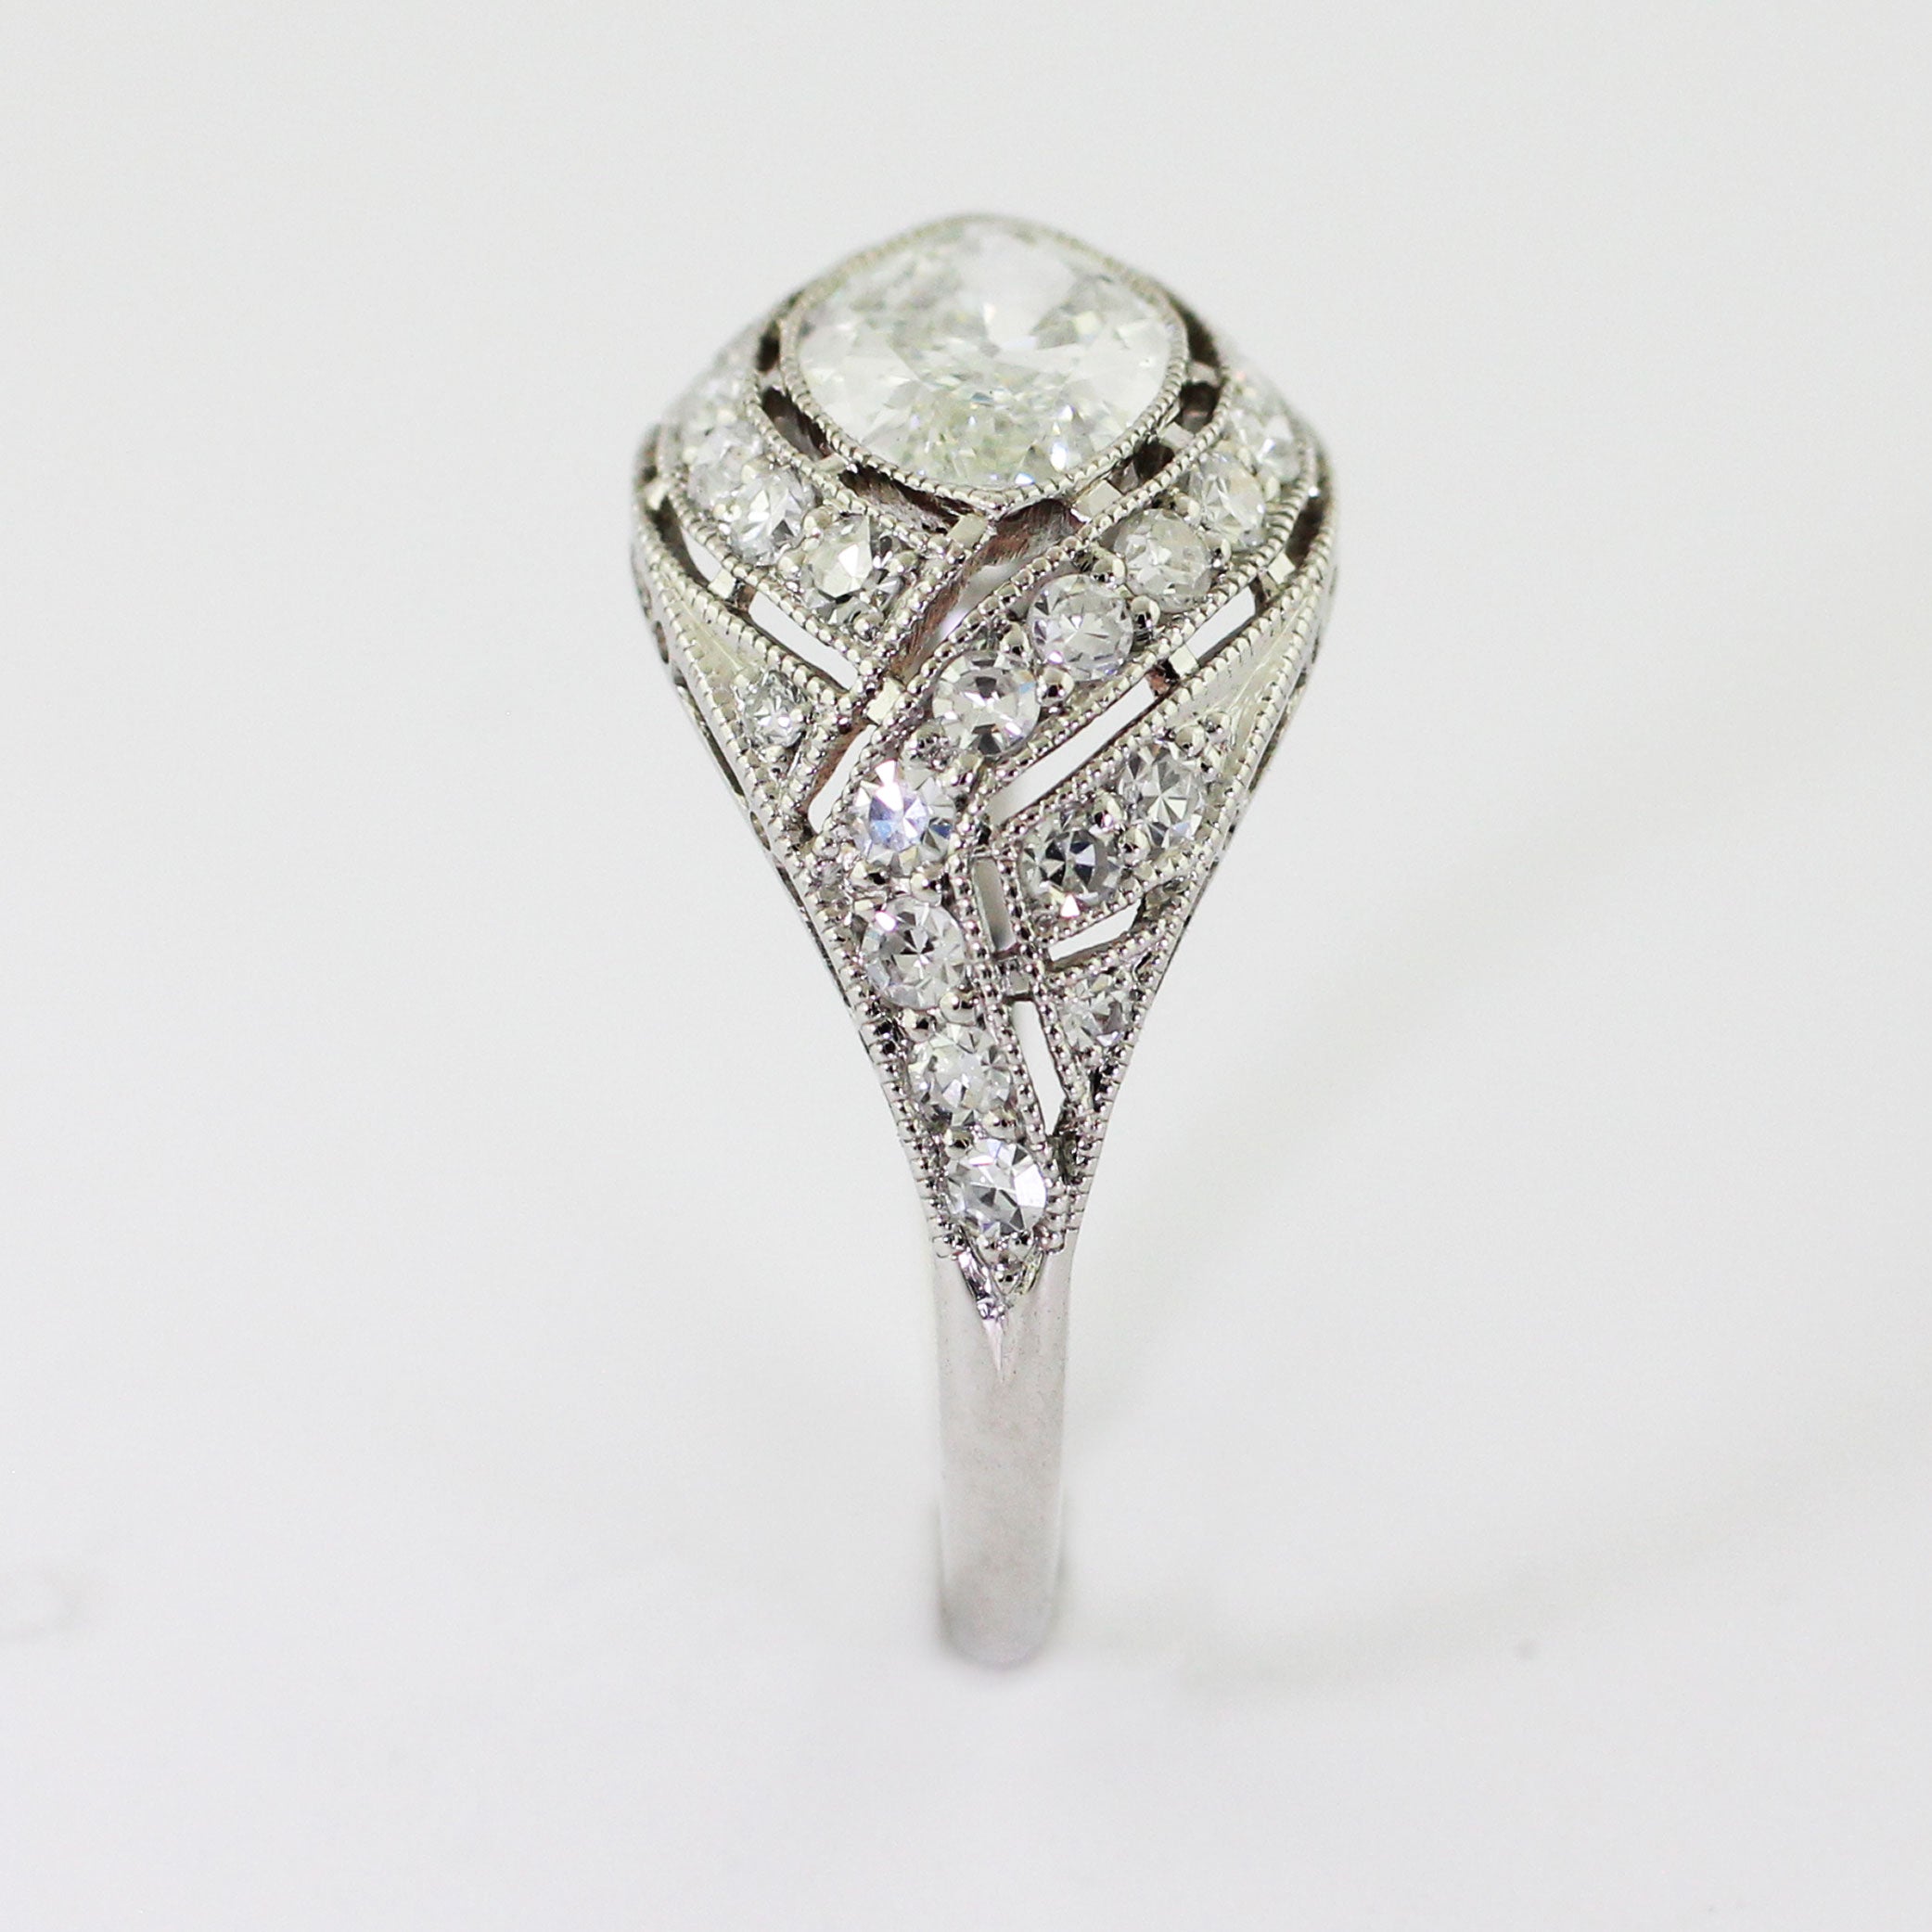 Custom platinum Art Deco ring featuring a marquise center diamond set in an illusion setting with milgrain detailing and bead-set accent diamonds.